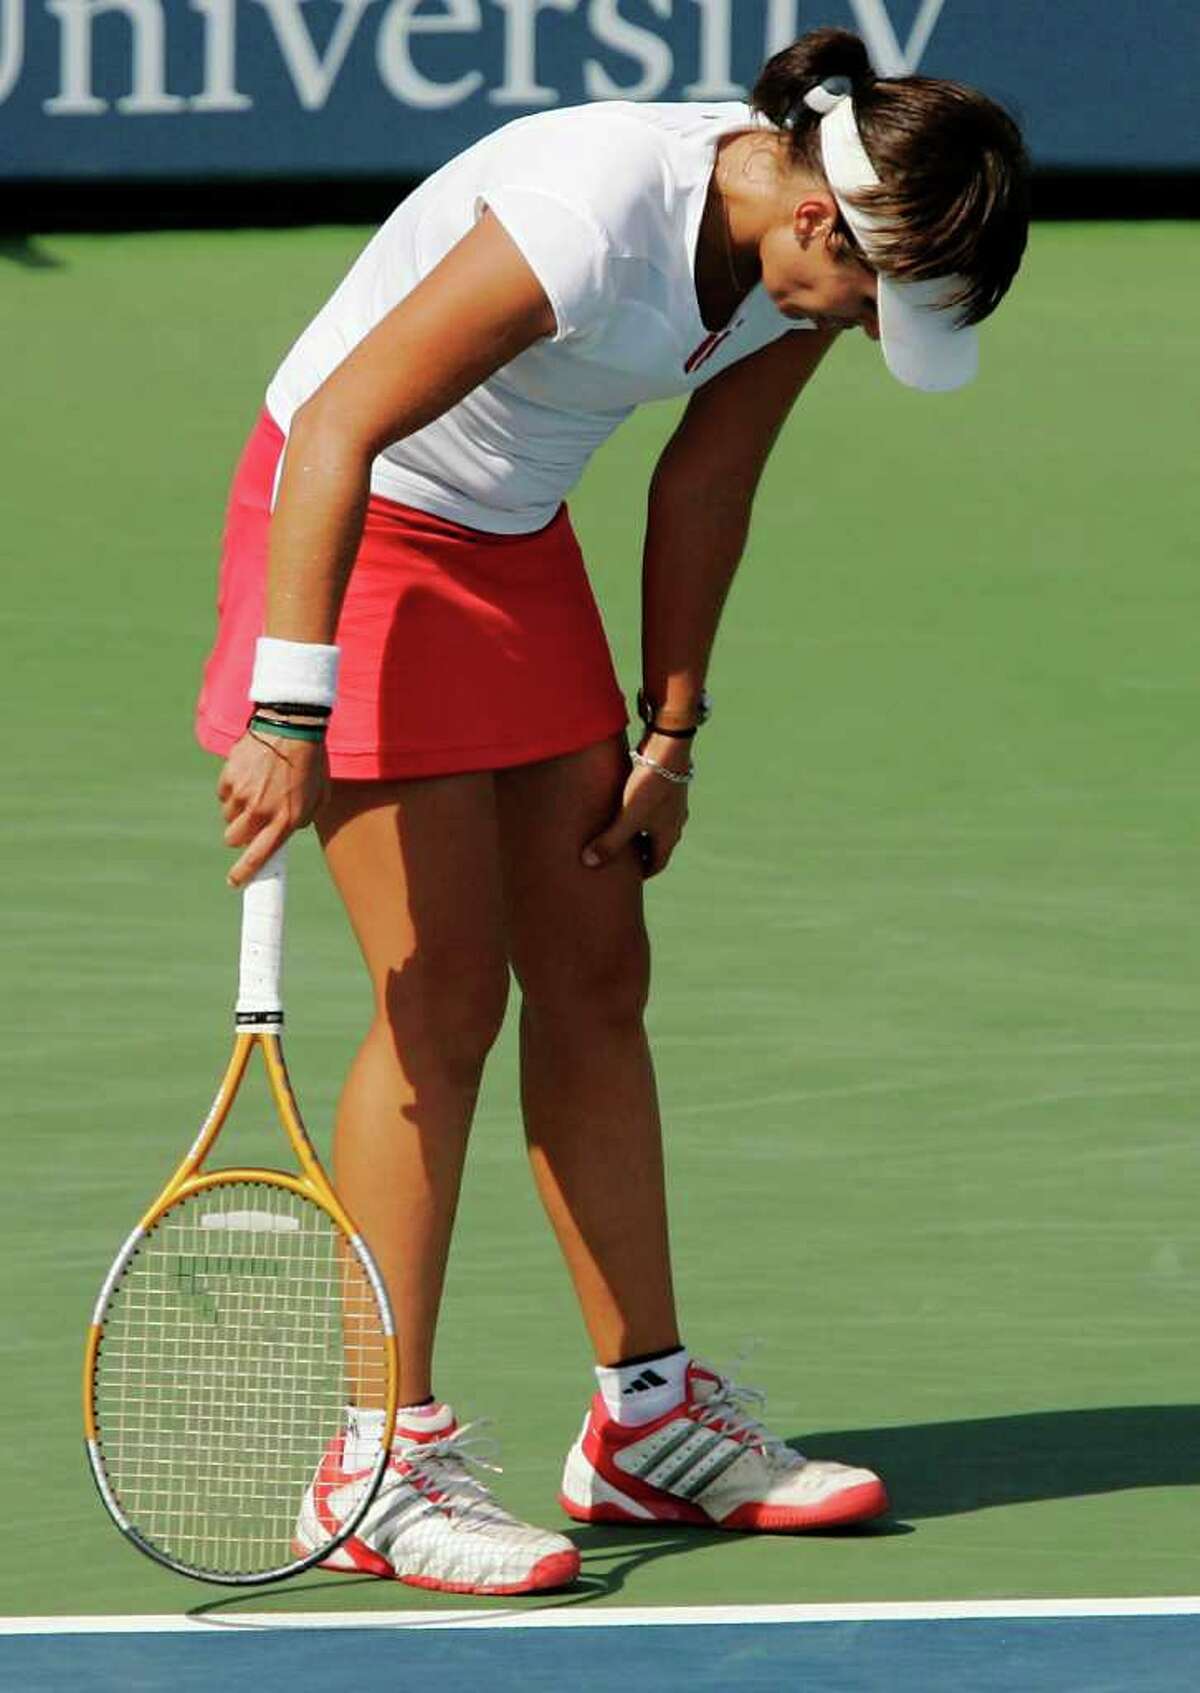 NEW HAVEN, CT - AUGUST 26: Anabel Medina Garrigues of Spain grabs her thigh after losing a point to Amelie Mauresmo of France during the Pilot Pen Tennis tournament on August 26, 2005 at the Connecticut Tennis Center at Yale in New Haven, Connecticut. Medina Garrigues was treated for cramps while Mauresmo went on to win 6-4, 7-6 (5), 6-2 to advance to the finals. (Photo by Brian Bahr/Getty Images)